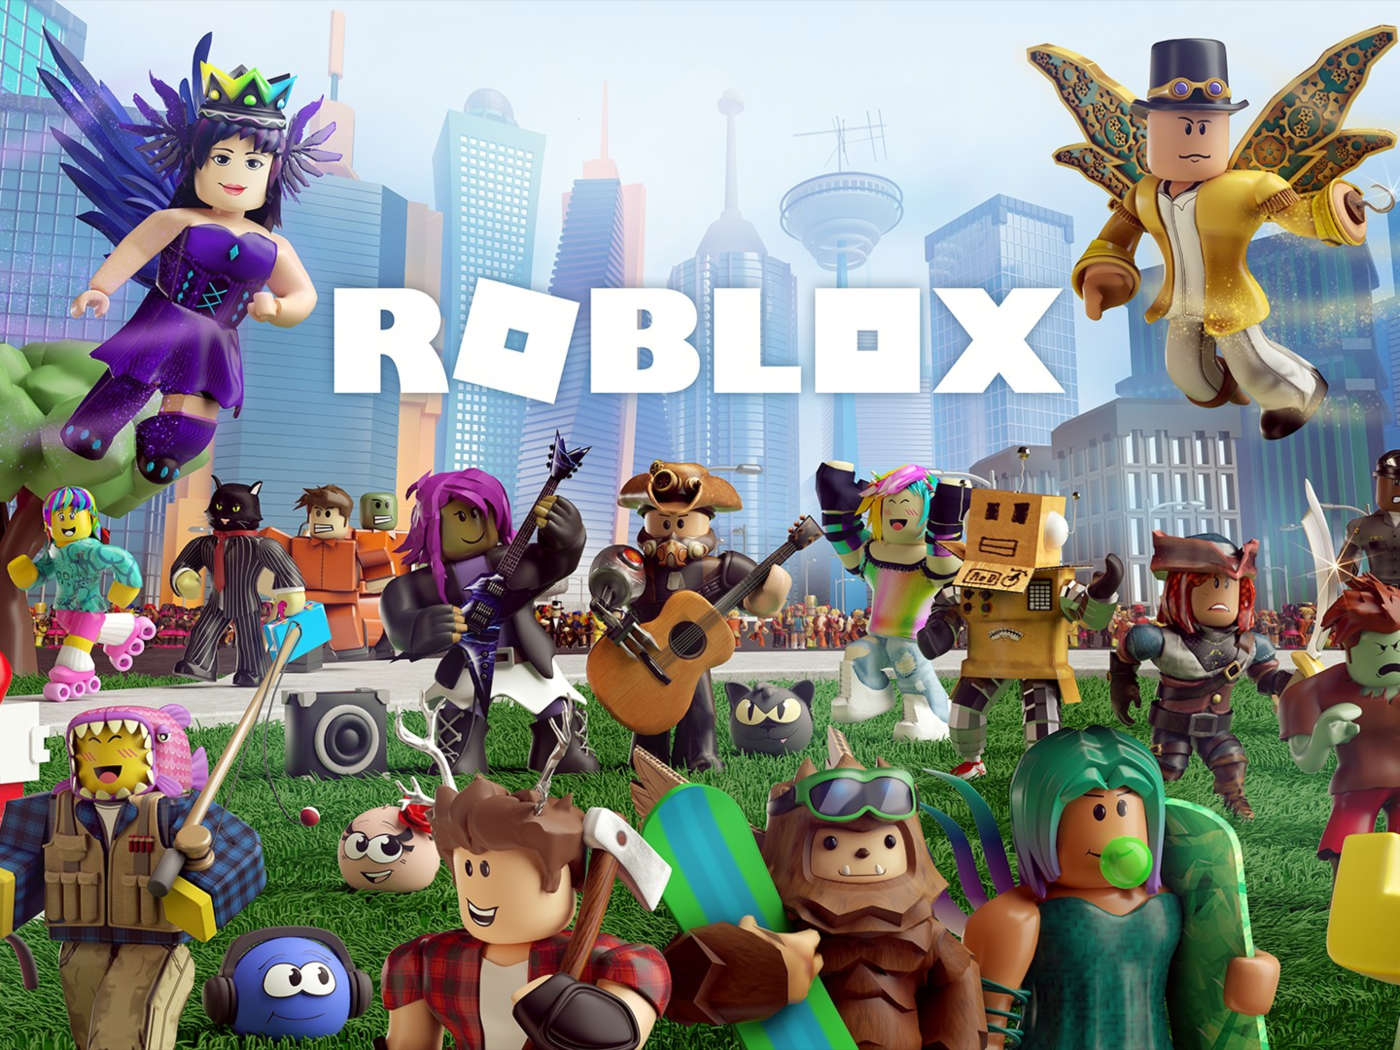 How to Play Roblox on PC